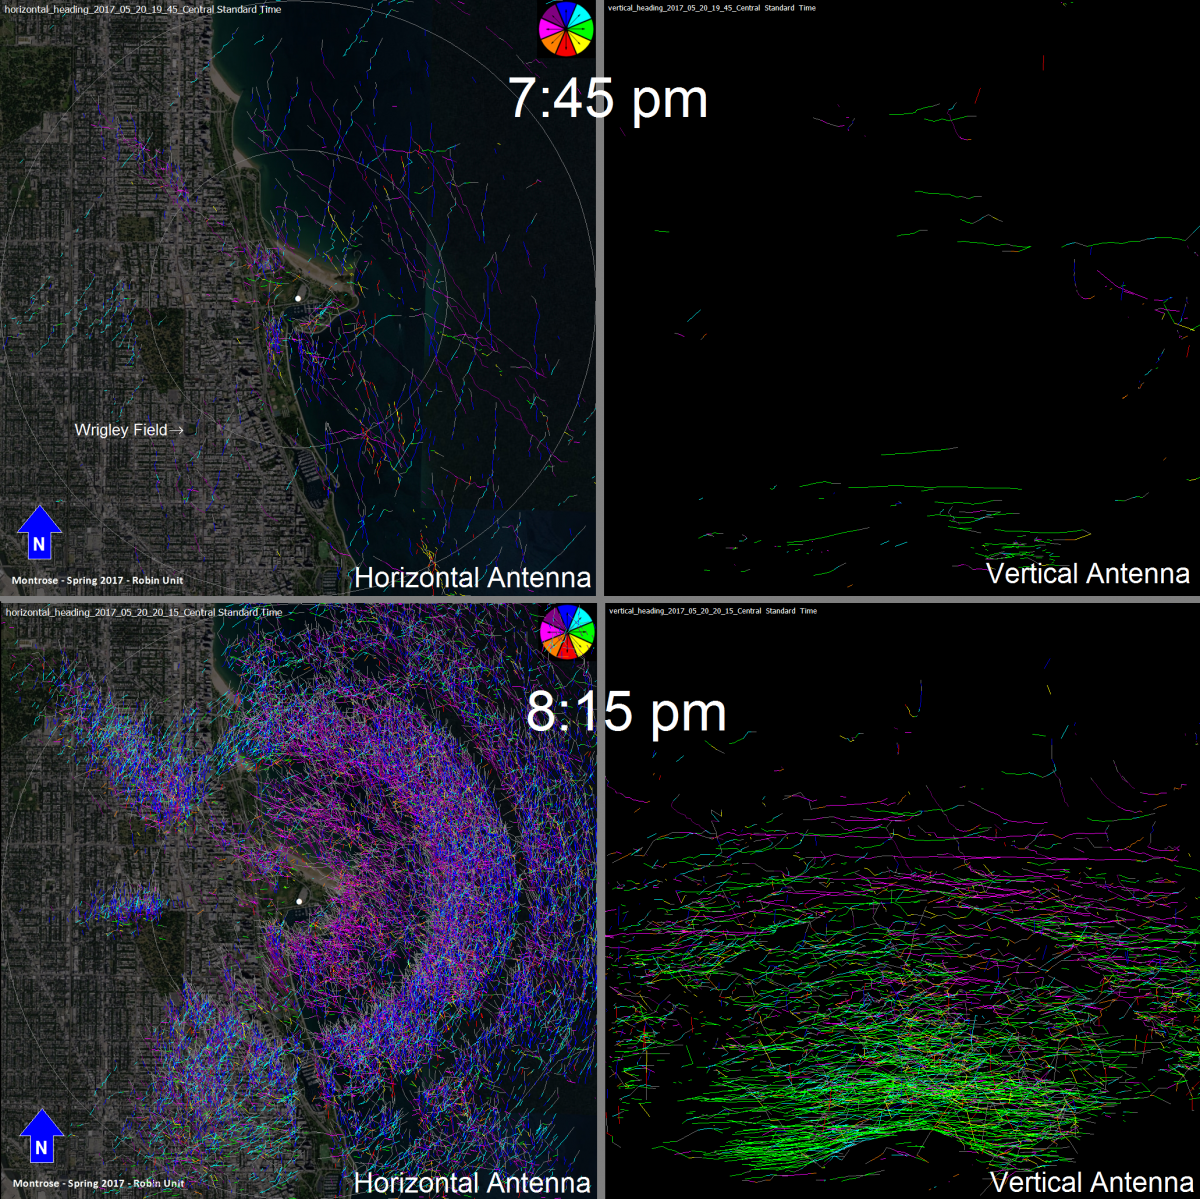 Comparison of horizontal (left) and vertical (right) radar antenna returns just before (top) and just after (bottom) sunset on May 20, 2017, at the Chicago study site (sunset was 8:09 pm). Each image represents targets tracked during a 15-minute sample.  Colors on the horizontal image represent direction of movement—blue for north, green for east, red for south, and pink for west; colors on the vertical antenna image are meaningless. The outer circle on the horizontal image has a radius of 3.7 km; the top of the vertical image is 2.8 km in altitude. Horizontal detection was largely blocked by the Chicago skyline to the west of the radar, while it was largely unobstructed to the east (over the lake).  Although a few gaps allowed some target detection to the west, the absence of tracks does not indicate low migrant activity.